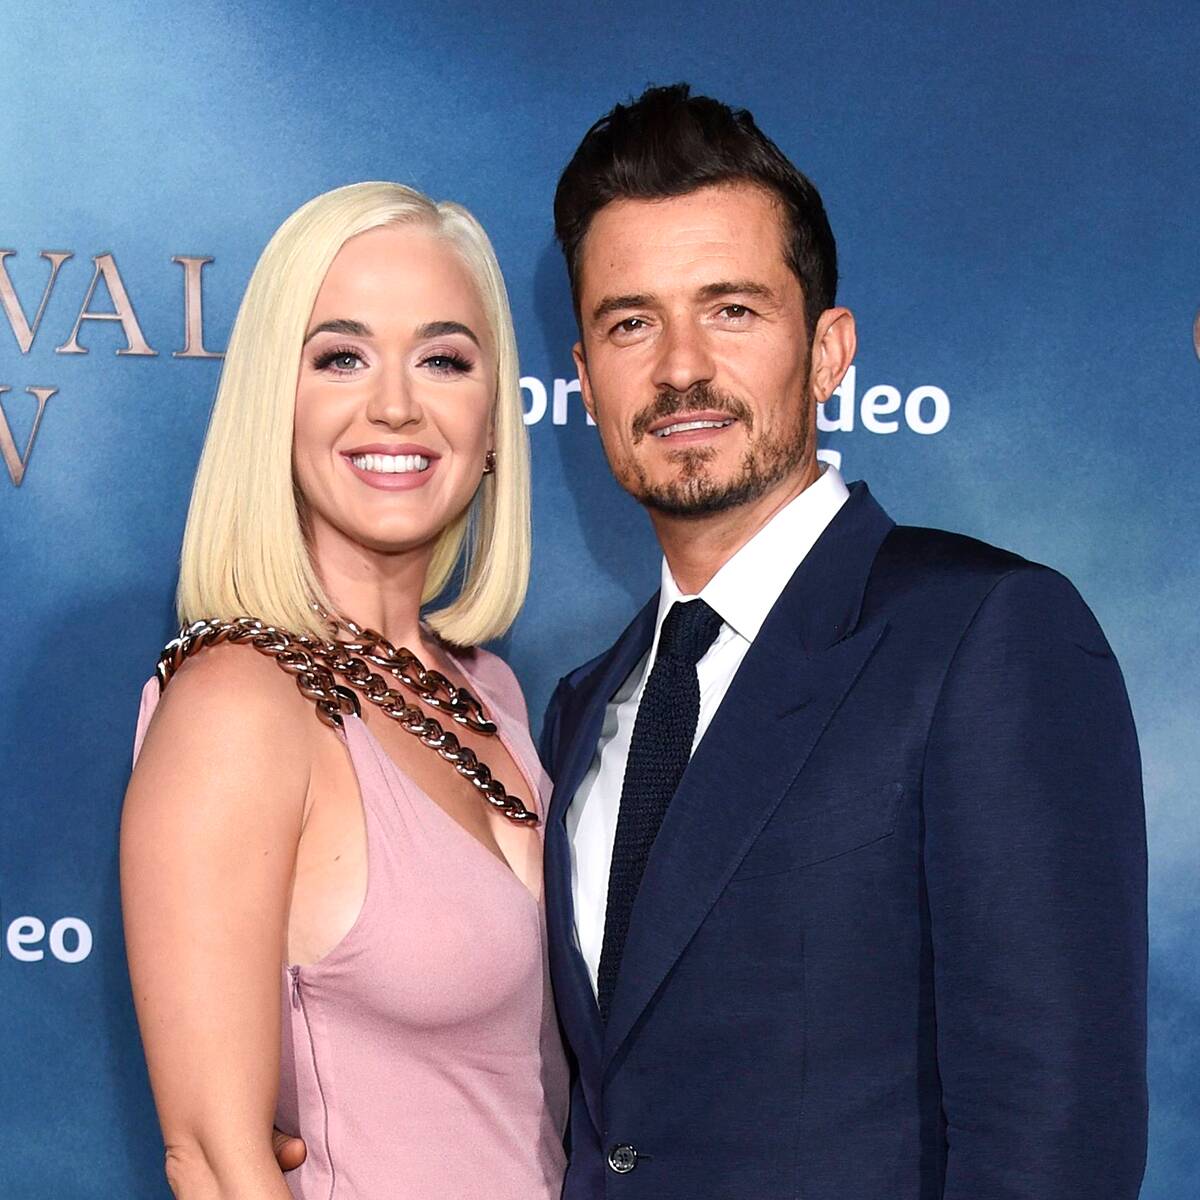 Katy Perry Says She Hadn't Wanted Orlando Bloom to Share Stories About Welcoming Son With Ex Miranda Kerr